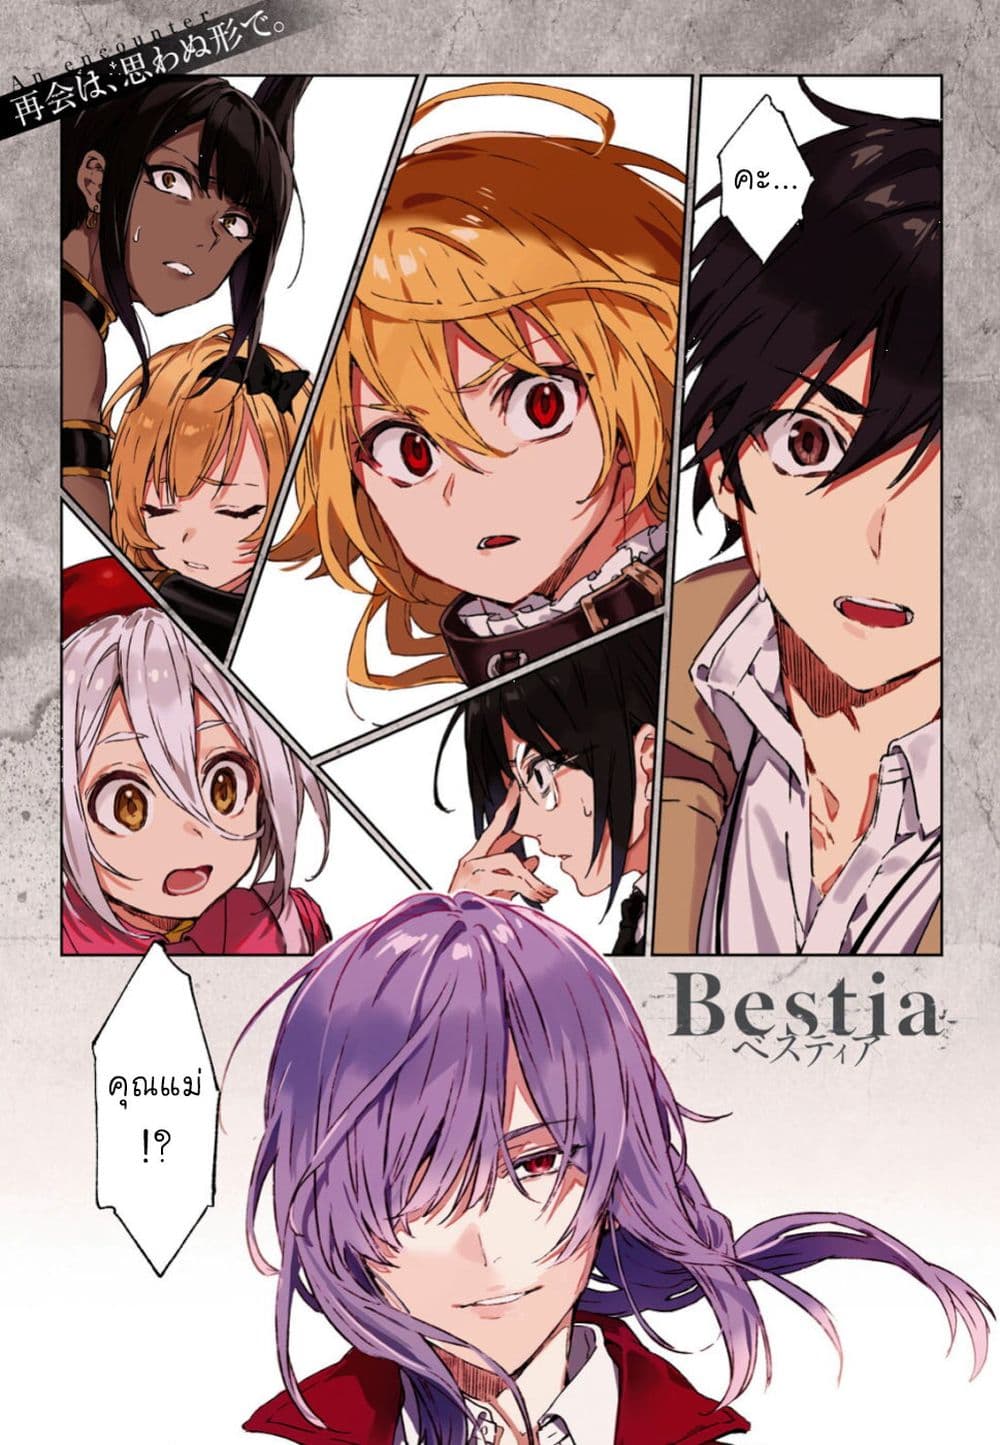 Bestia 9-Thunder rolls in the distance